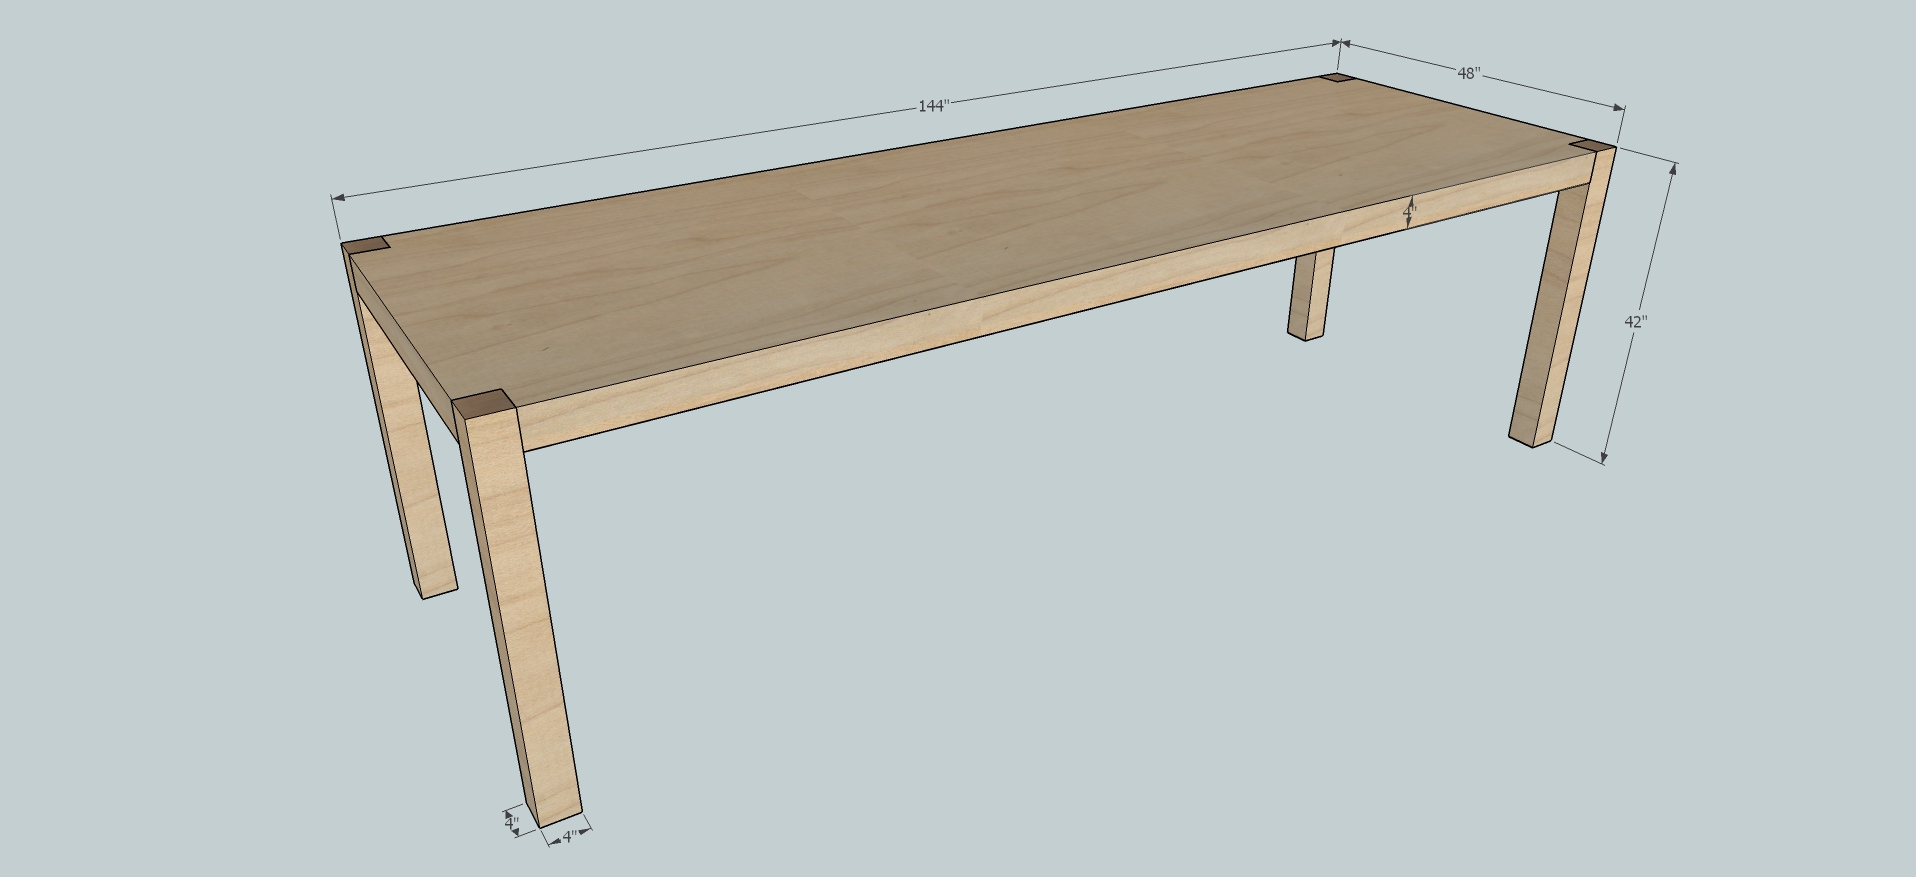 Parsons Table Woodworking Plans | Brokeasshome.com